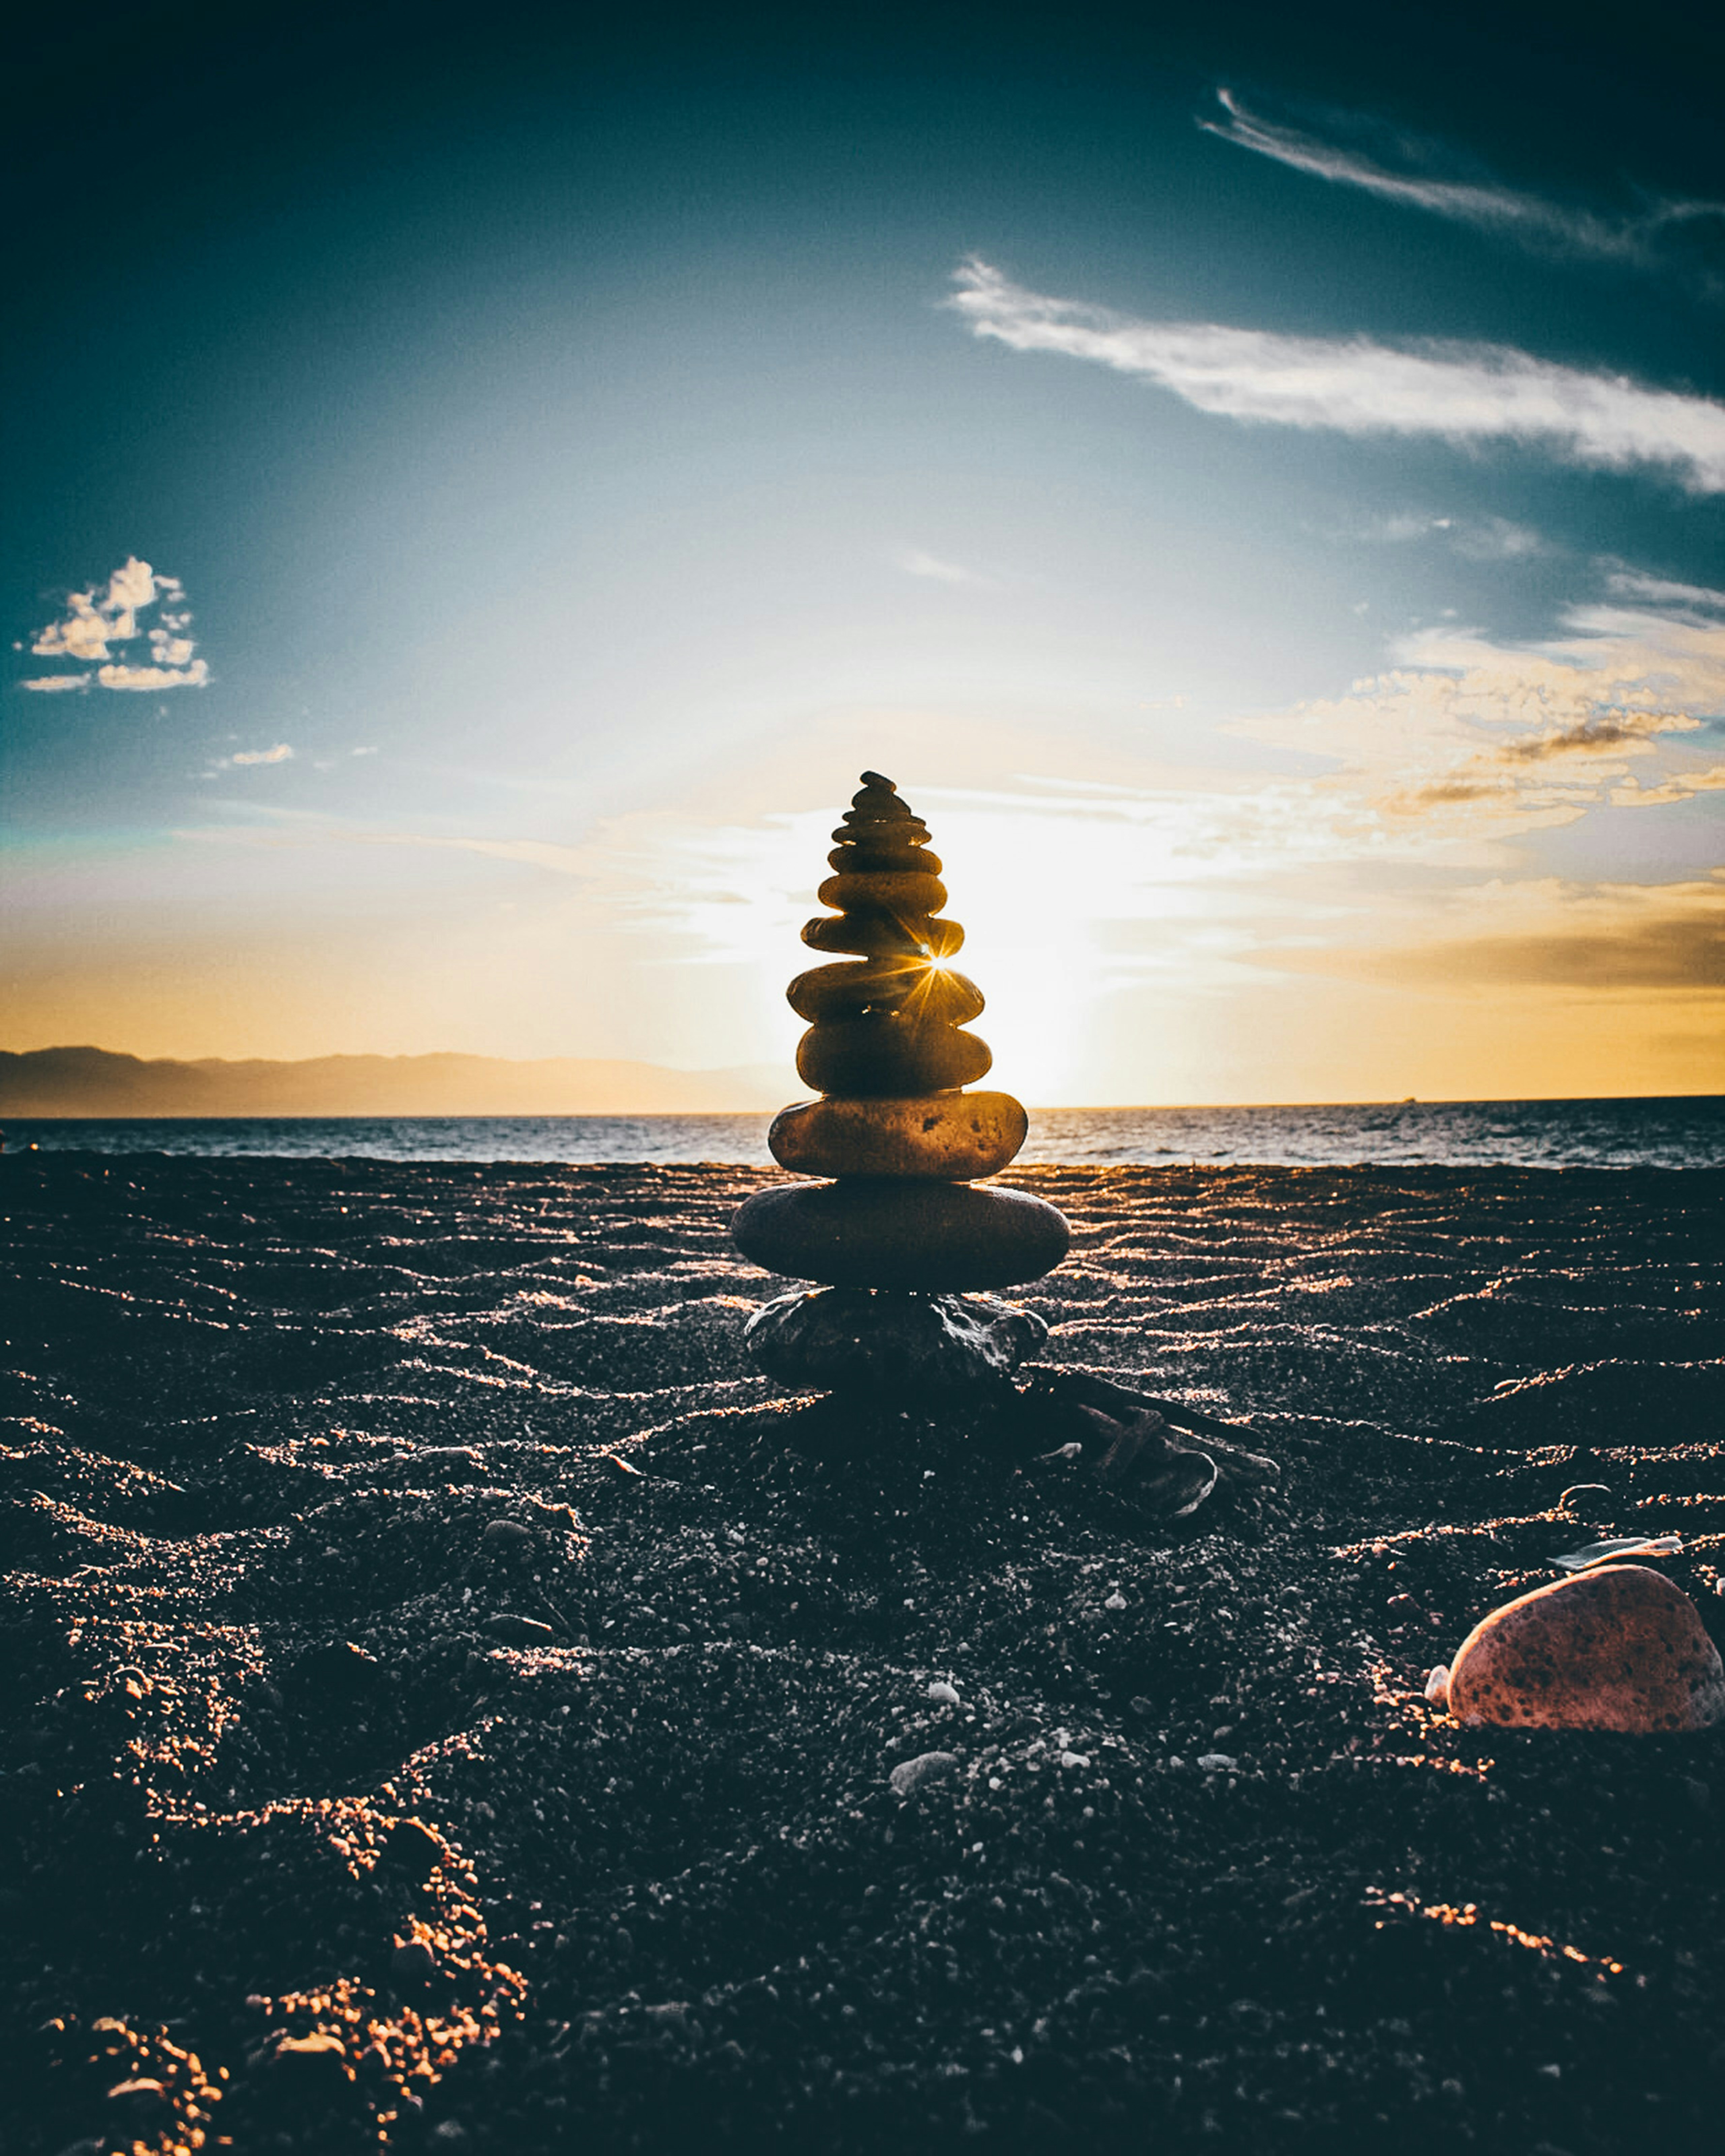 Tree made of a pile of rocks in front of the sunset